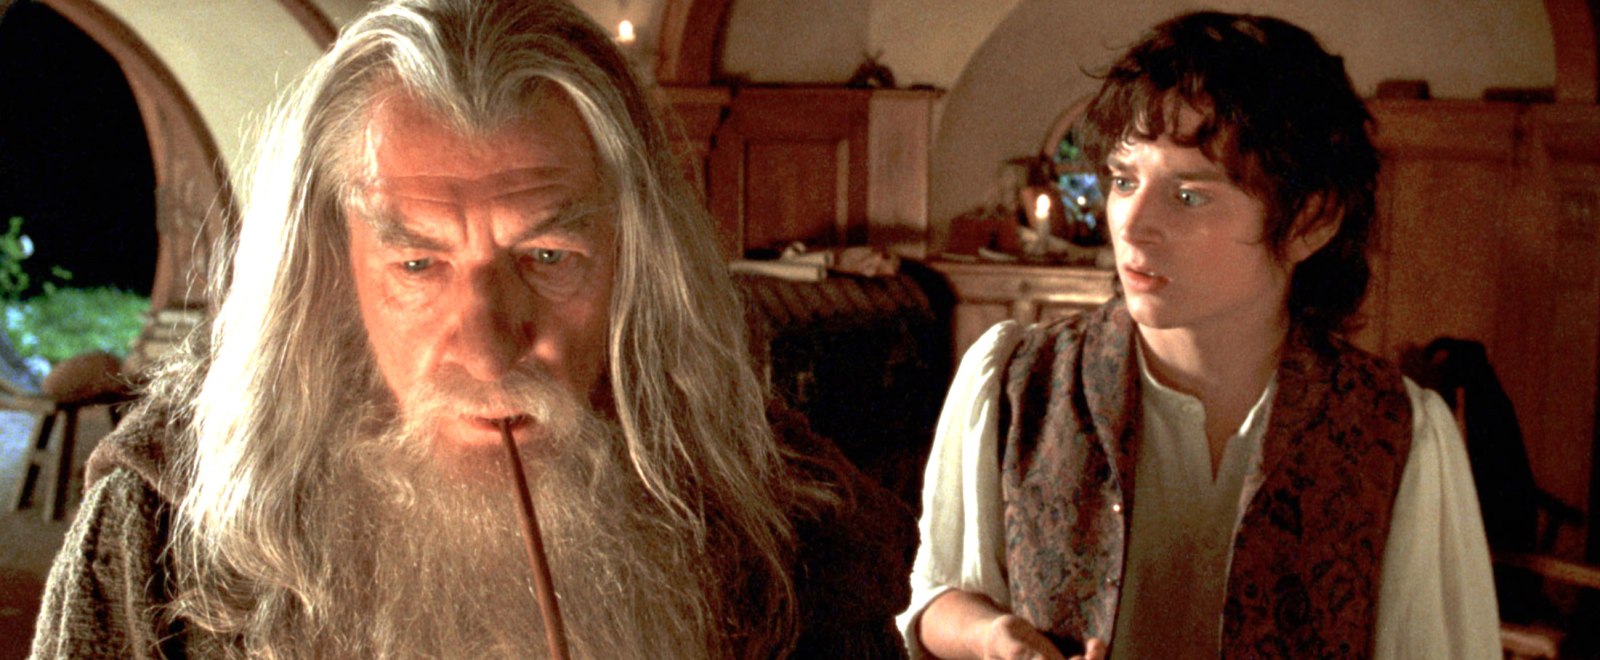 Amazon’s Wildly-Expensive ‘Lord Of The Rings’ Series Gets A Wildly-Intriguing Plot Description